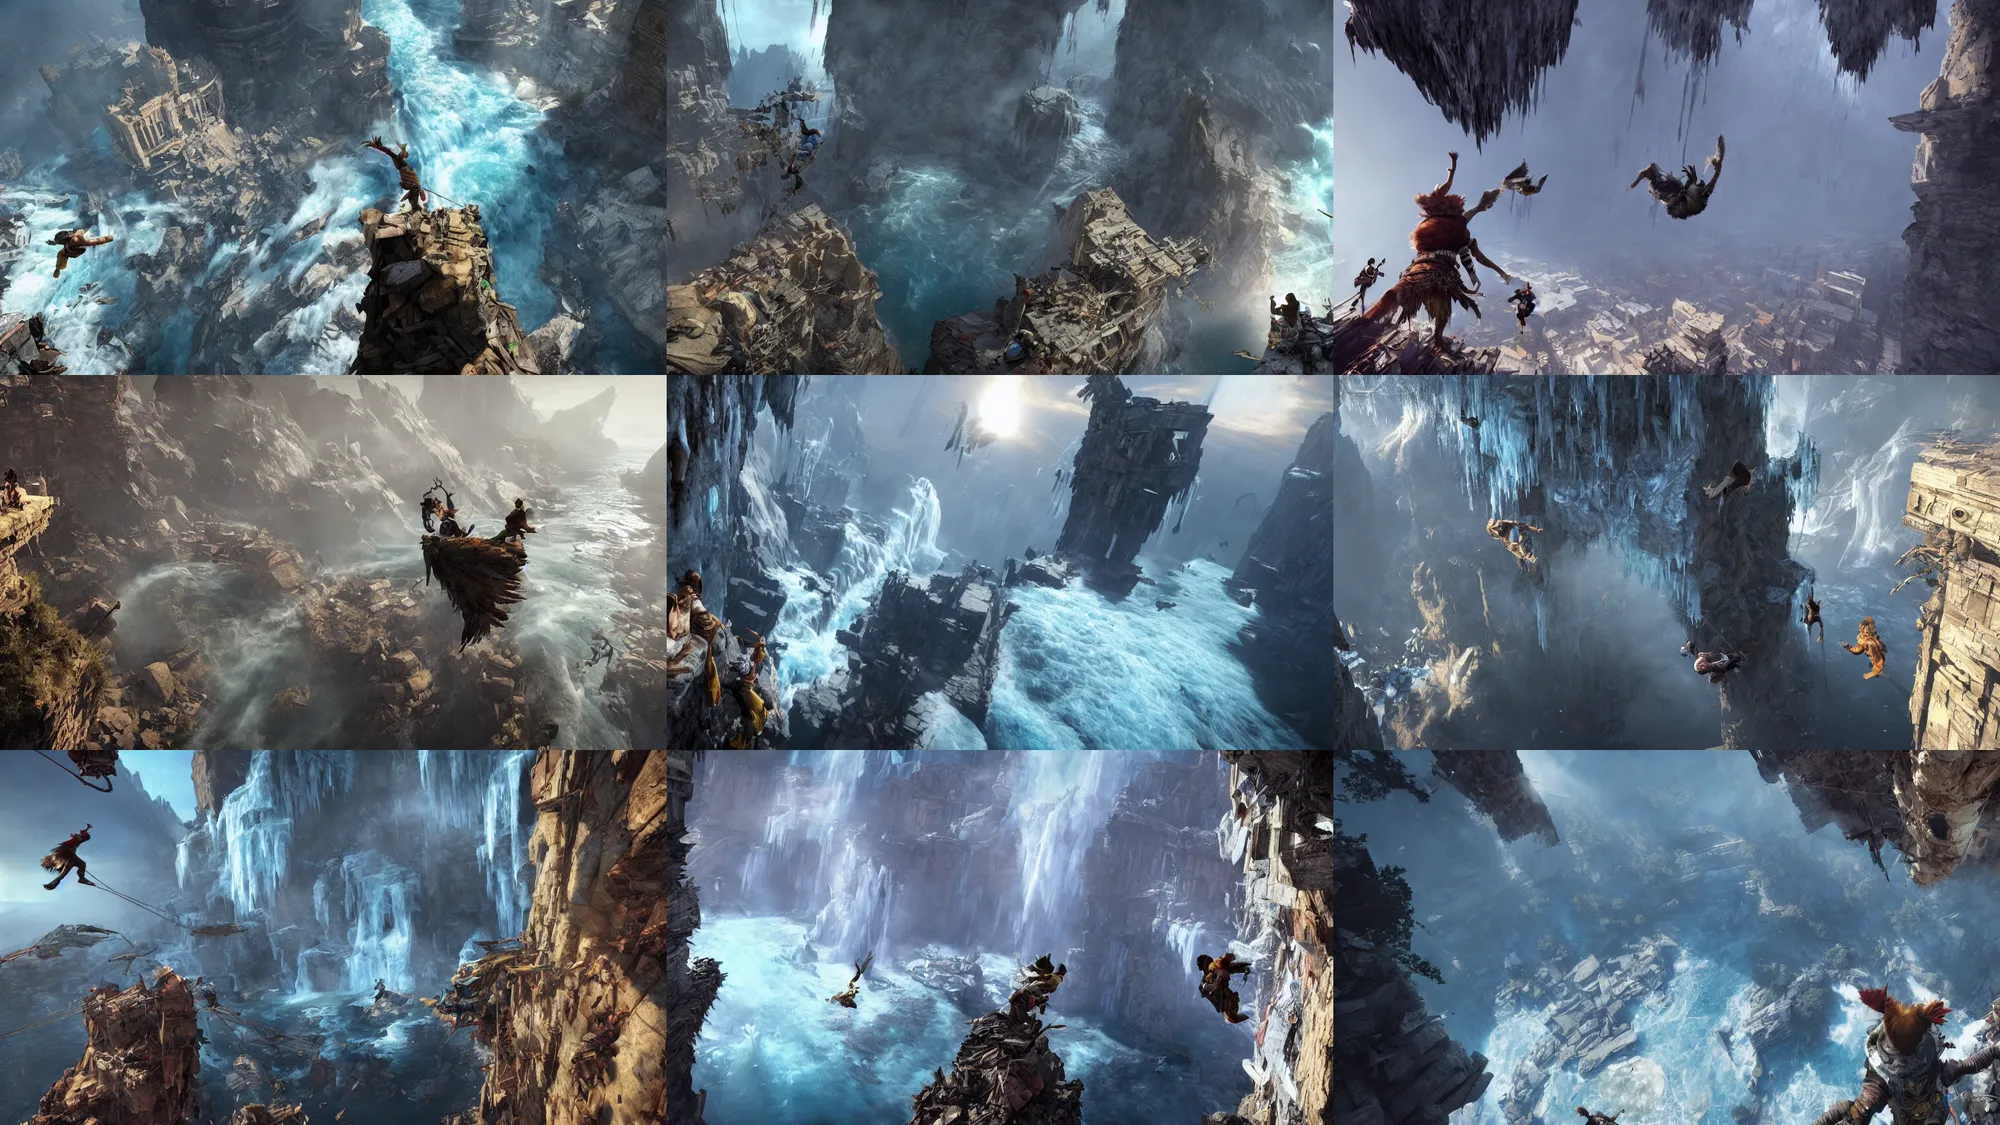 Prompt: incredible screenshot of the last guardian, gravity rush, god of war 3, on PS5, Unreal engine 5, golden hour, frozen waterfalls, obsidian spikes, torn banners, dust storm, dynamic camera angle, deep 3 point perspective, fish eye, dynamic extreme foreshortening, rock climbing, scaffolding collapsing, brick debris, vertigo, fear of heights, contrasting shadows, valley mist, huge chasm, broken bridges, 8k, hd, high resolution